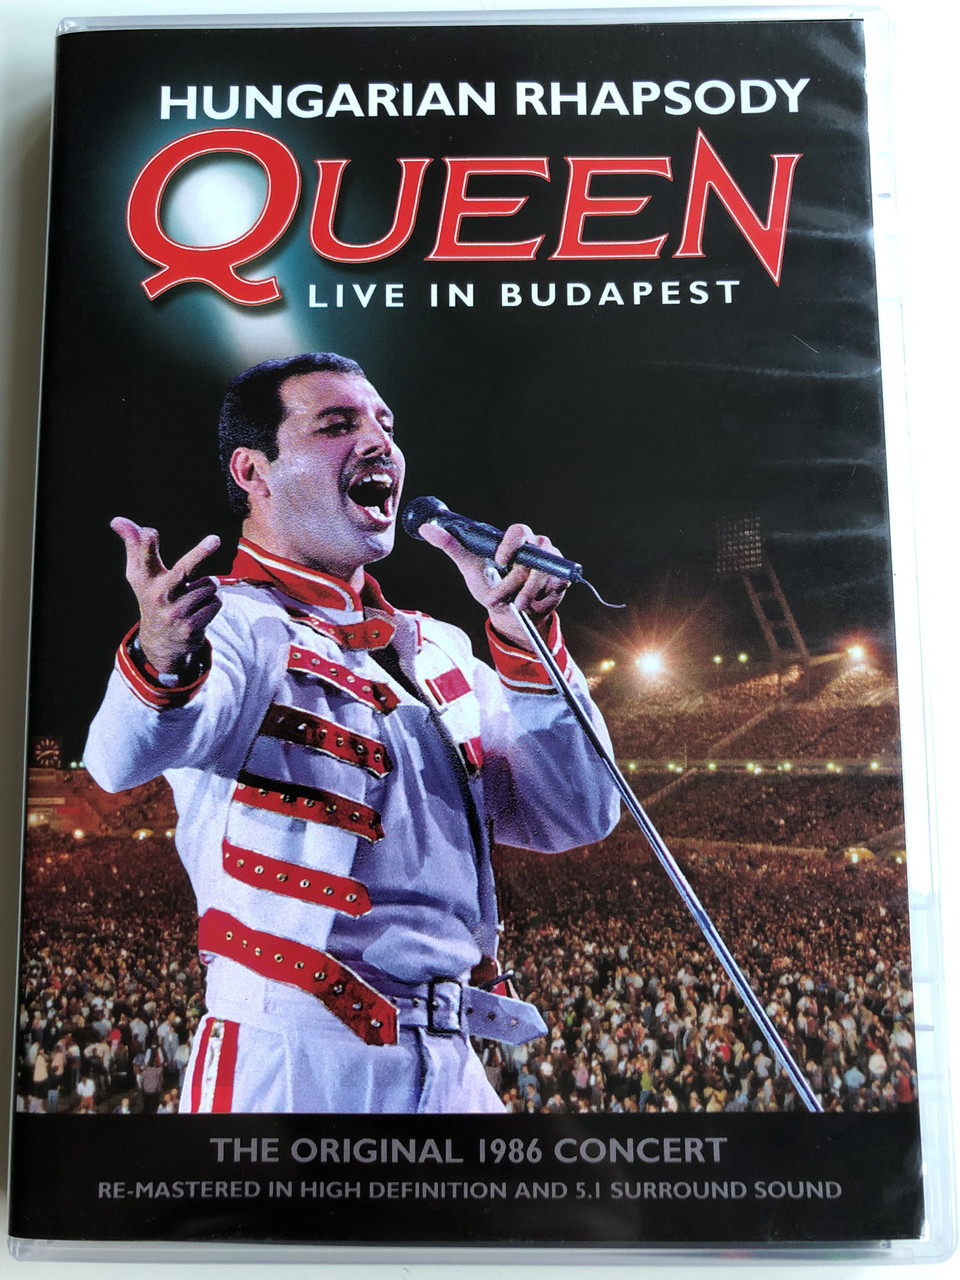 Queen - Live in Budapest DVD Hungarian Rhapsody / The Original 1986 Concert  / Re-Mastered in High Definition / Additional Content: A Magic Year  -Documentary - bibleinmylanguage